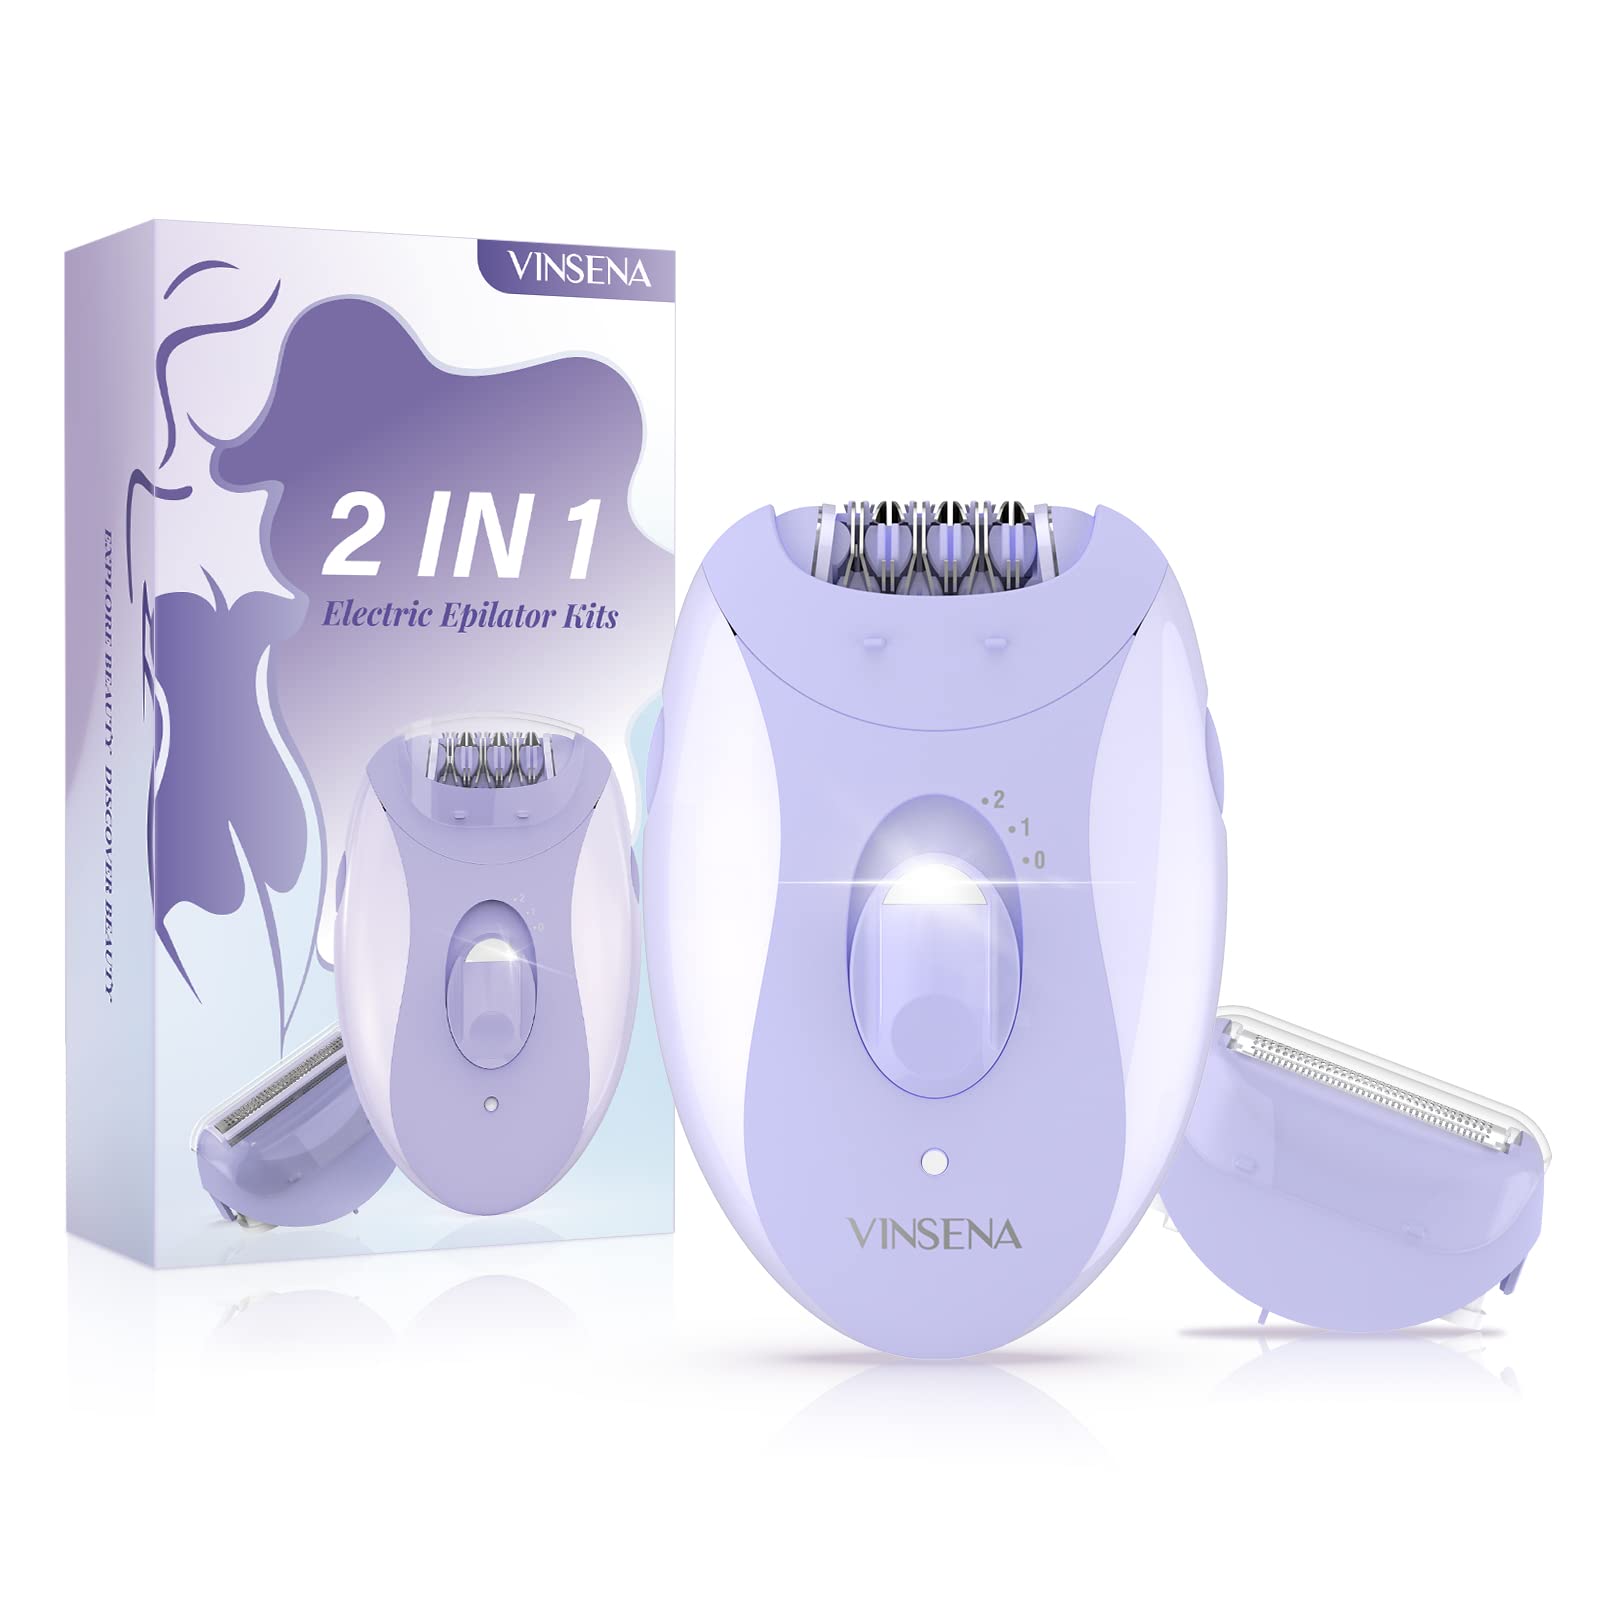 Epilator for Women, VINSENA 2 in 1 Hair Removal Epilator for Women, Cordless Ladies Electric Epilator with Epilator Head & Shaver Head, for Underarms, Legs, Arms, Bikini, with LED Light